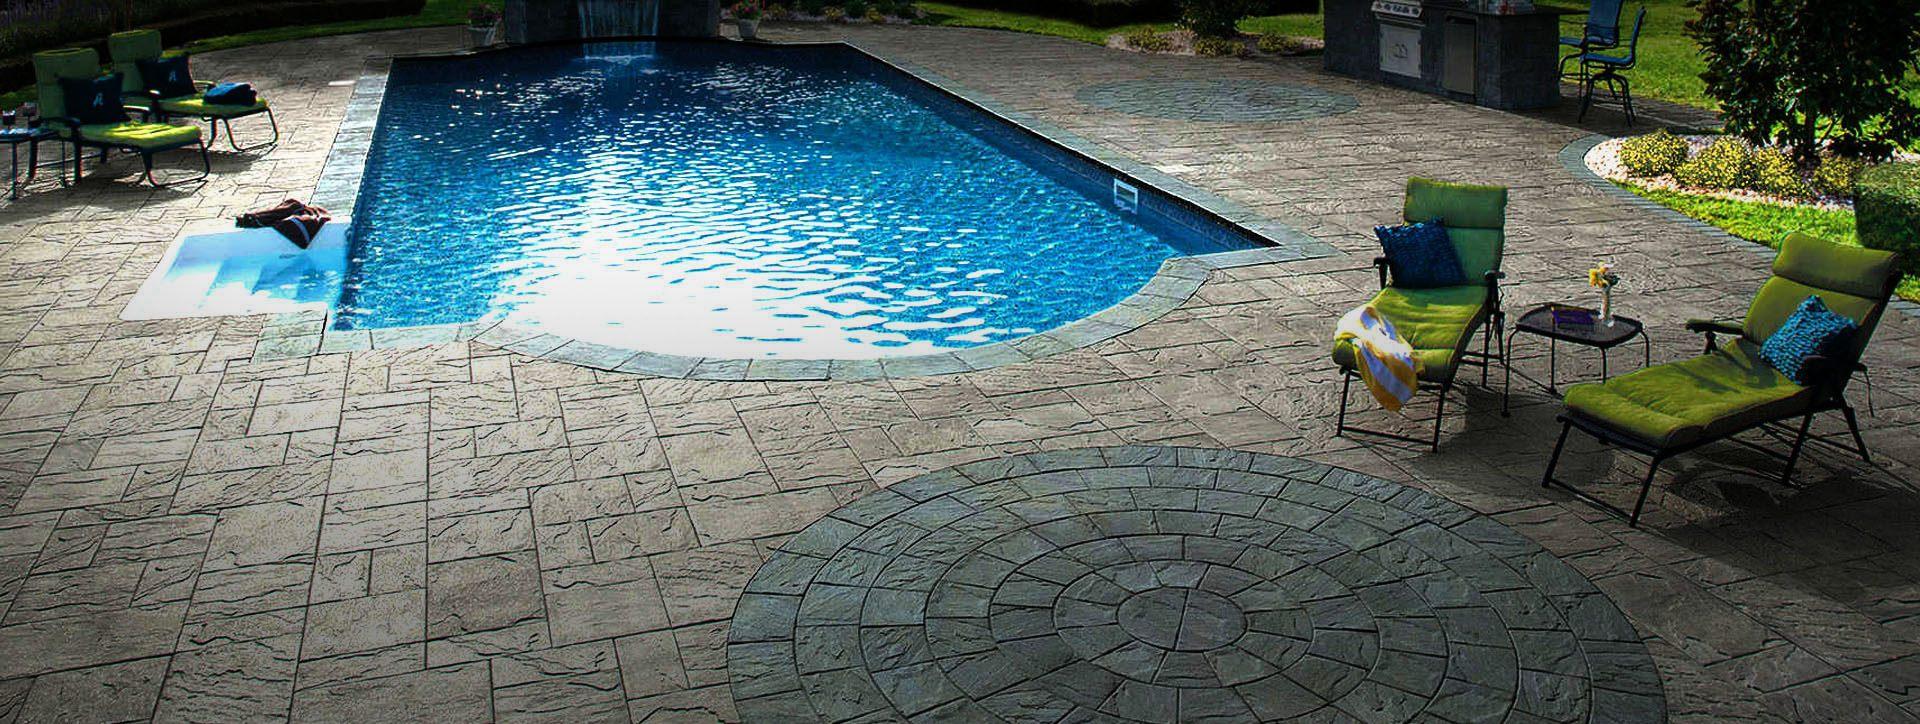 Ocean County patio nj paving Business Landscaping tips